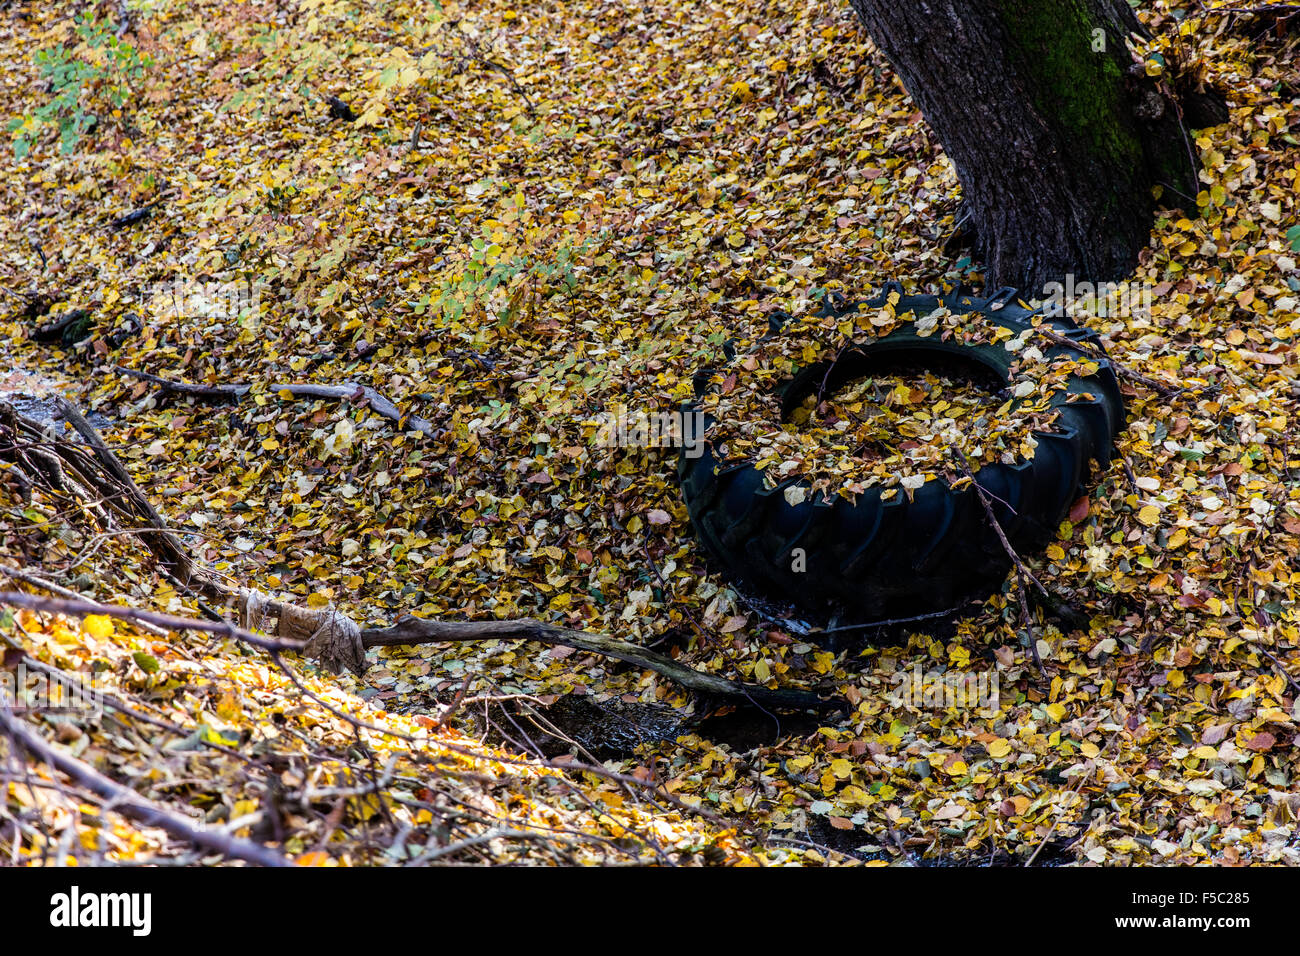 Tire in the autumn forest Stock Photo